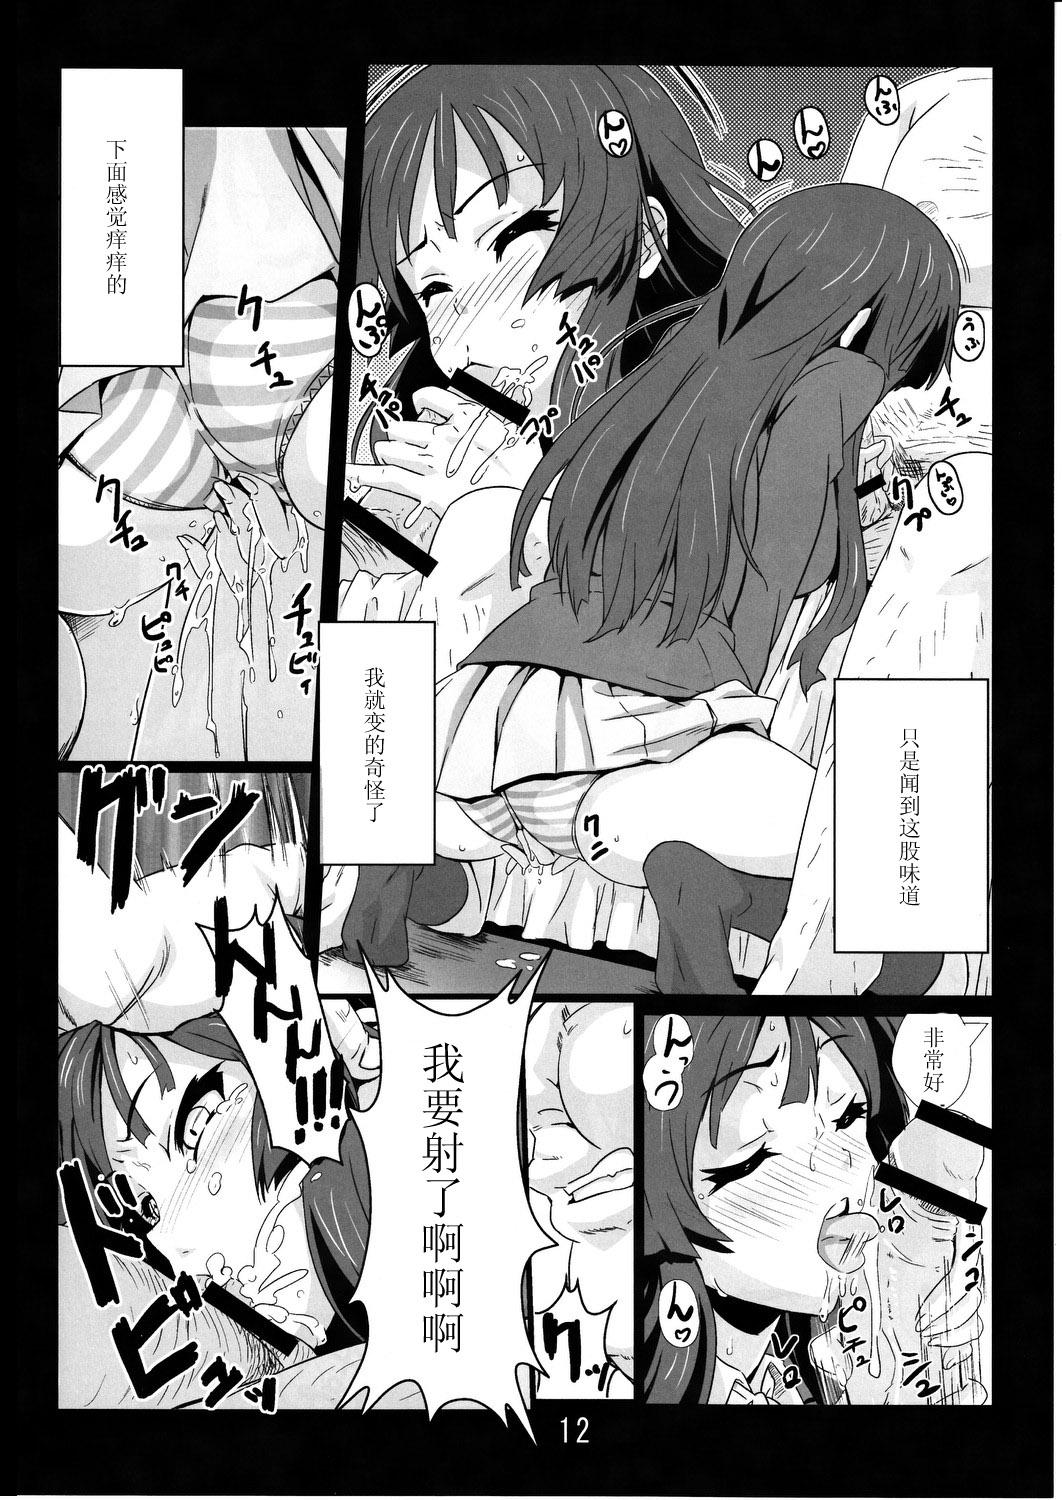 Stepdad Listen to me! - K-on Rough Porn - Page 11